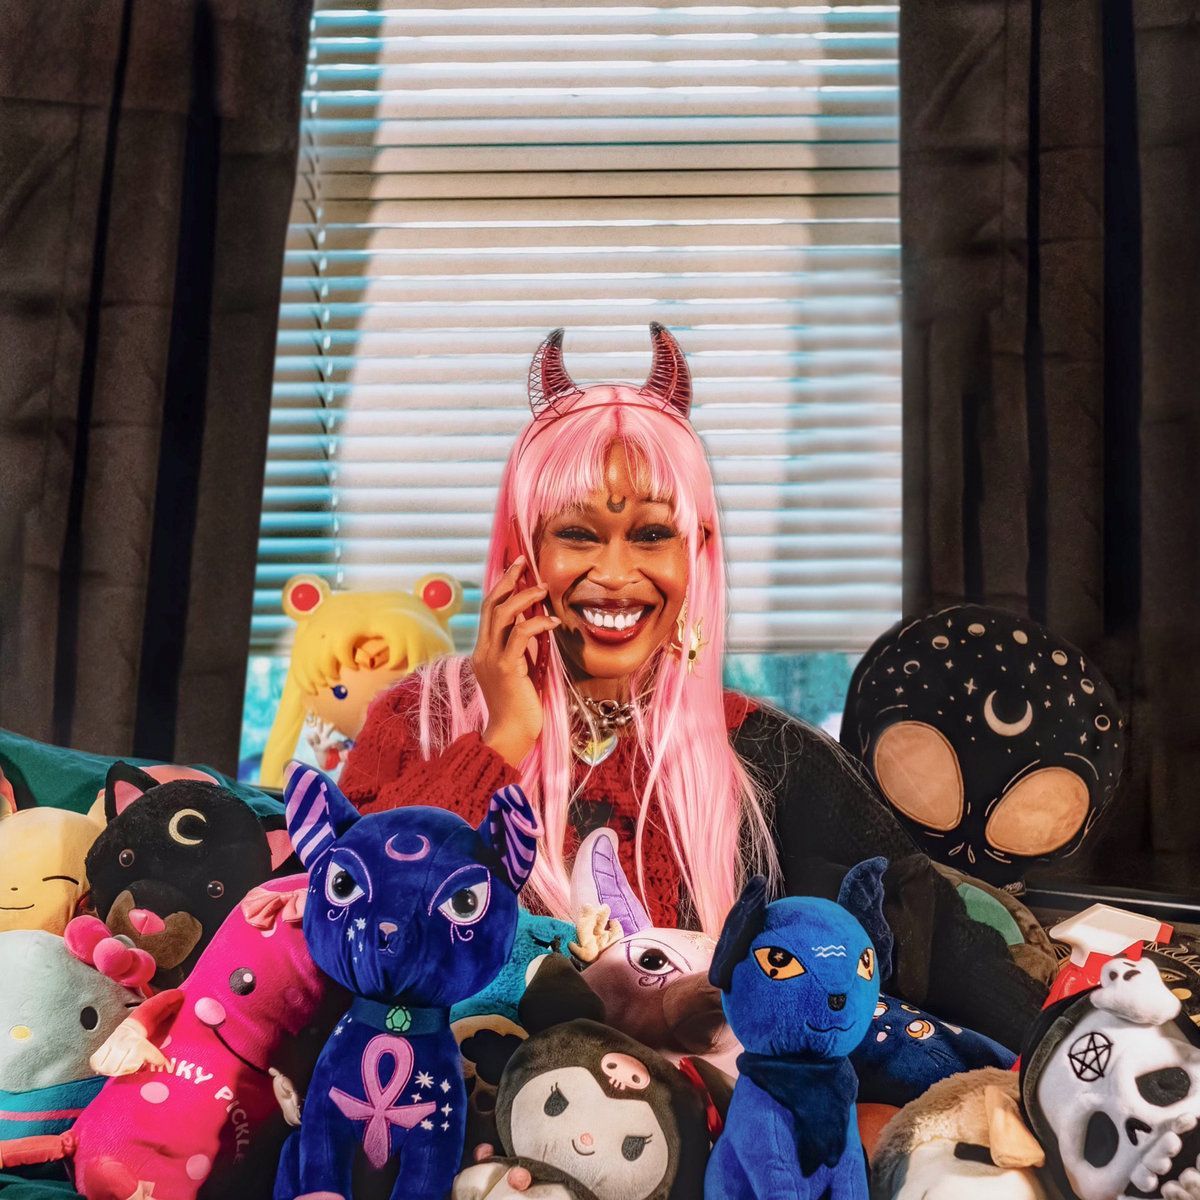 Rapper bbymutha is bringing her Sleep Paralysis tour to Antone’s on May 12! With Fly Anakin kicking off the night. Grab your tickets in advance now ➡️ buff.ly/3xvW9Ep